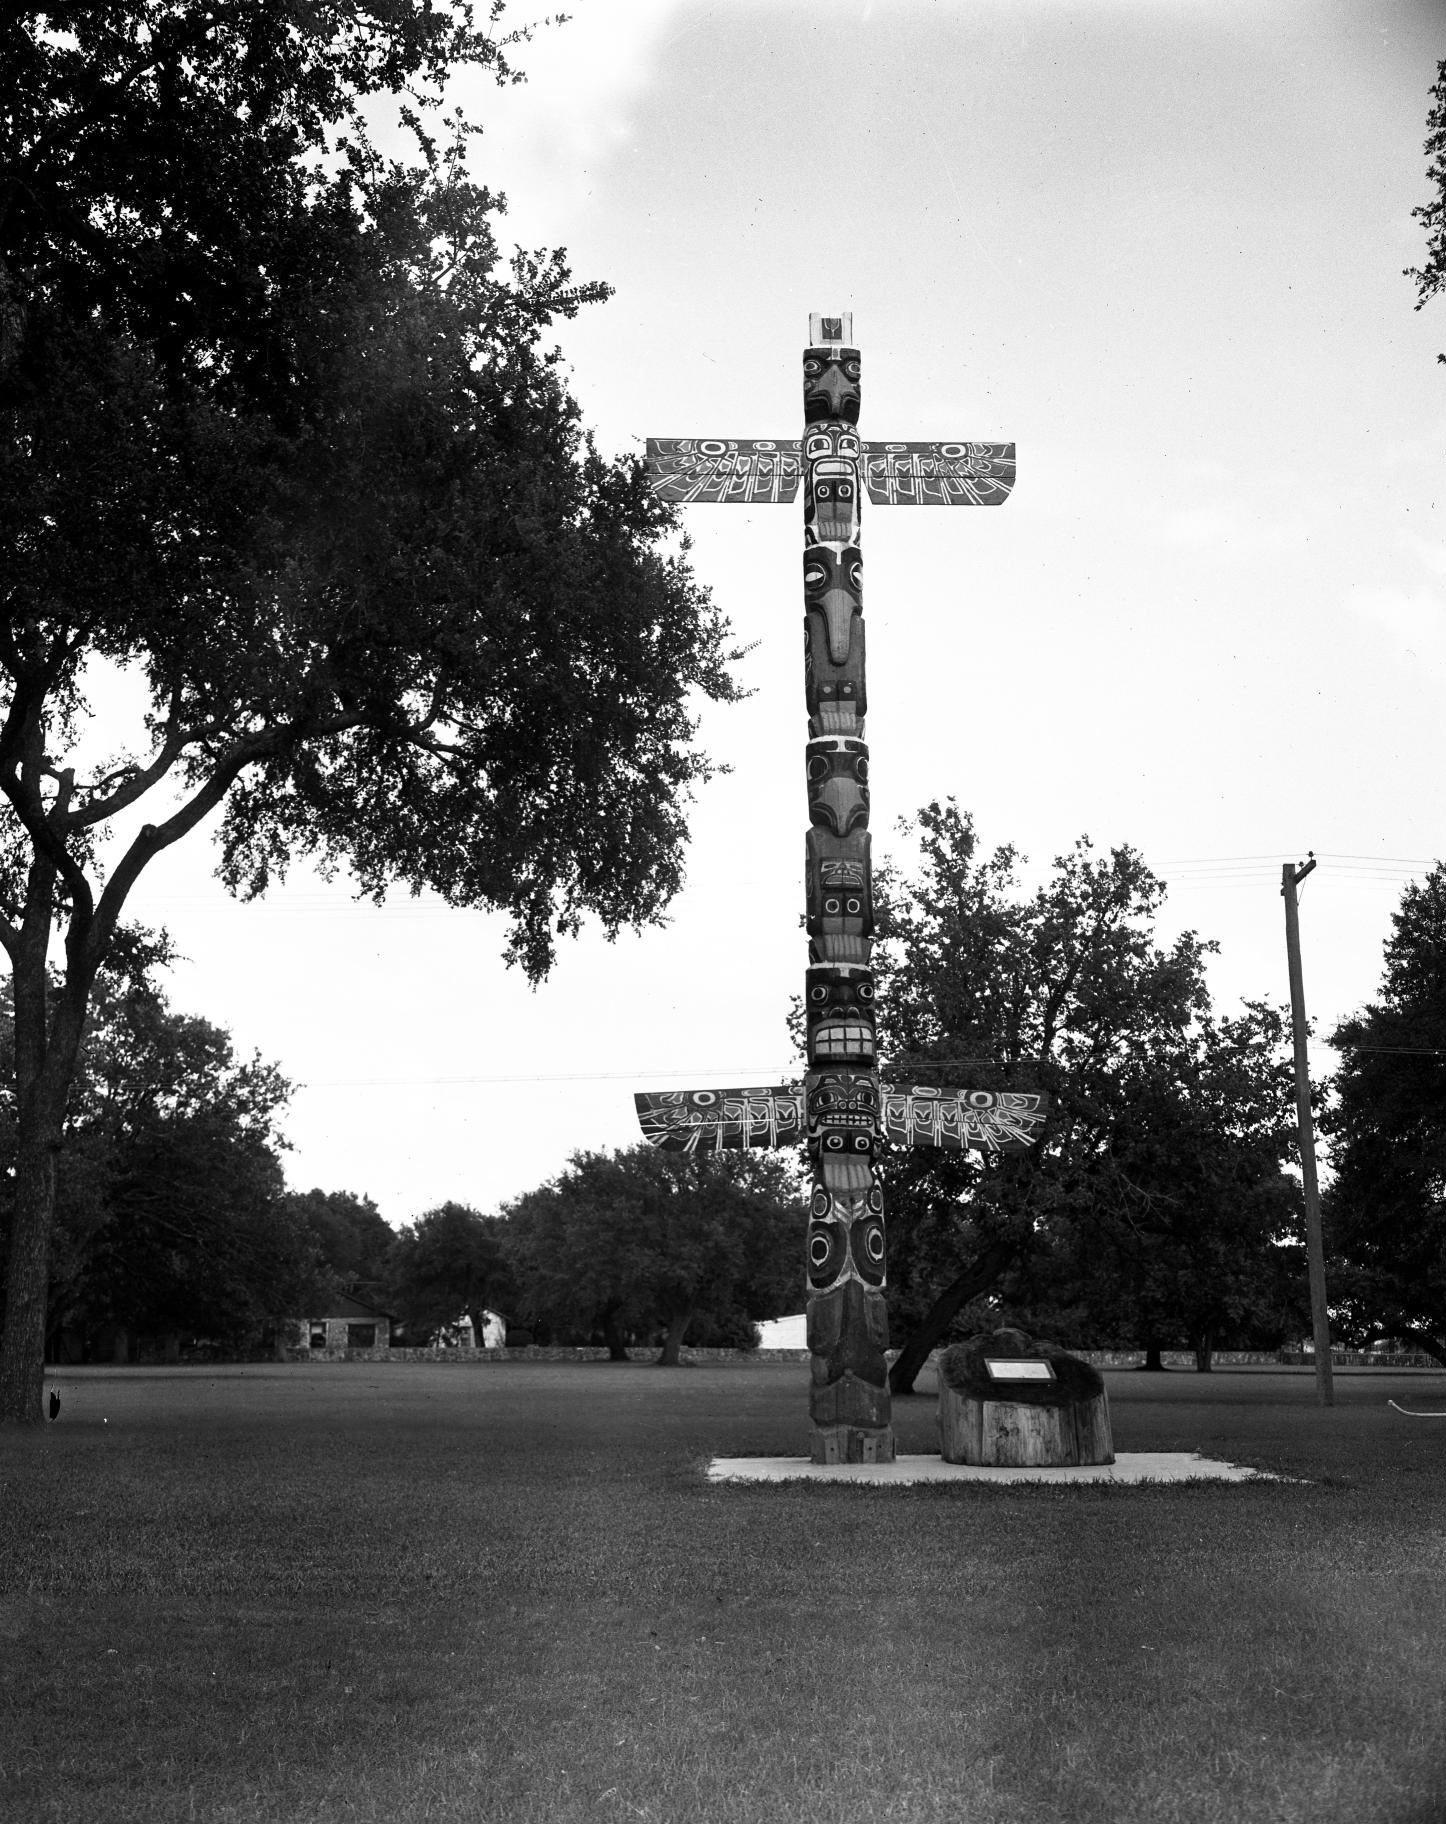 Totem Pole at Texas Military Forces Museum, Camp Mabry, 1950.